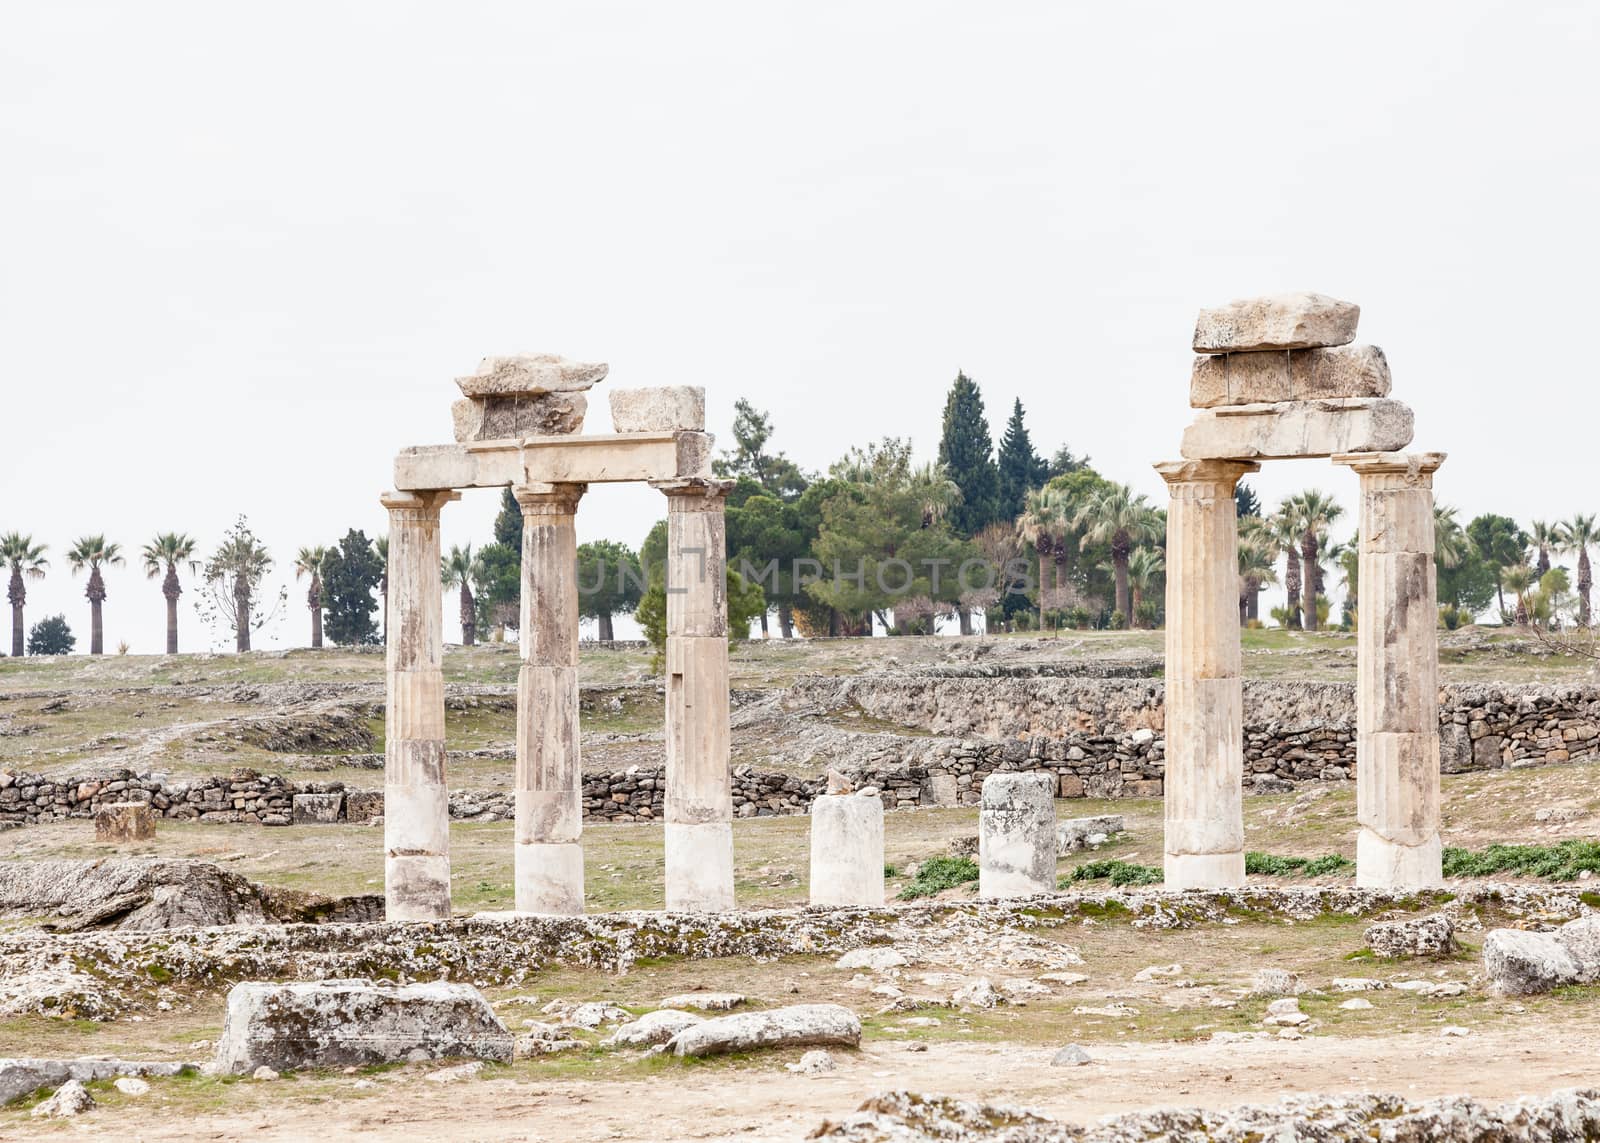 The ruins of the ancient city of Hierapolis is located adjacent to the hot springs of Pamukkale in Turkey.  The site is a UNESCO world heritage site.